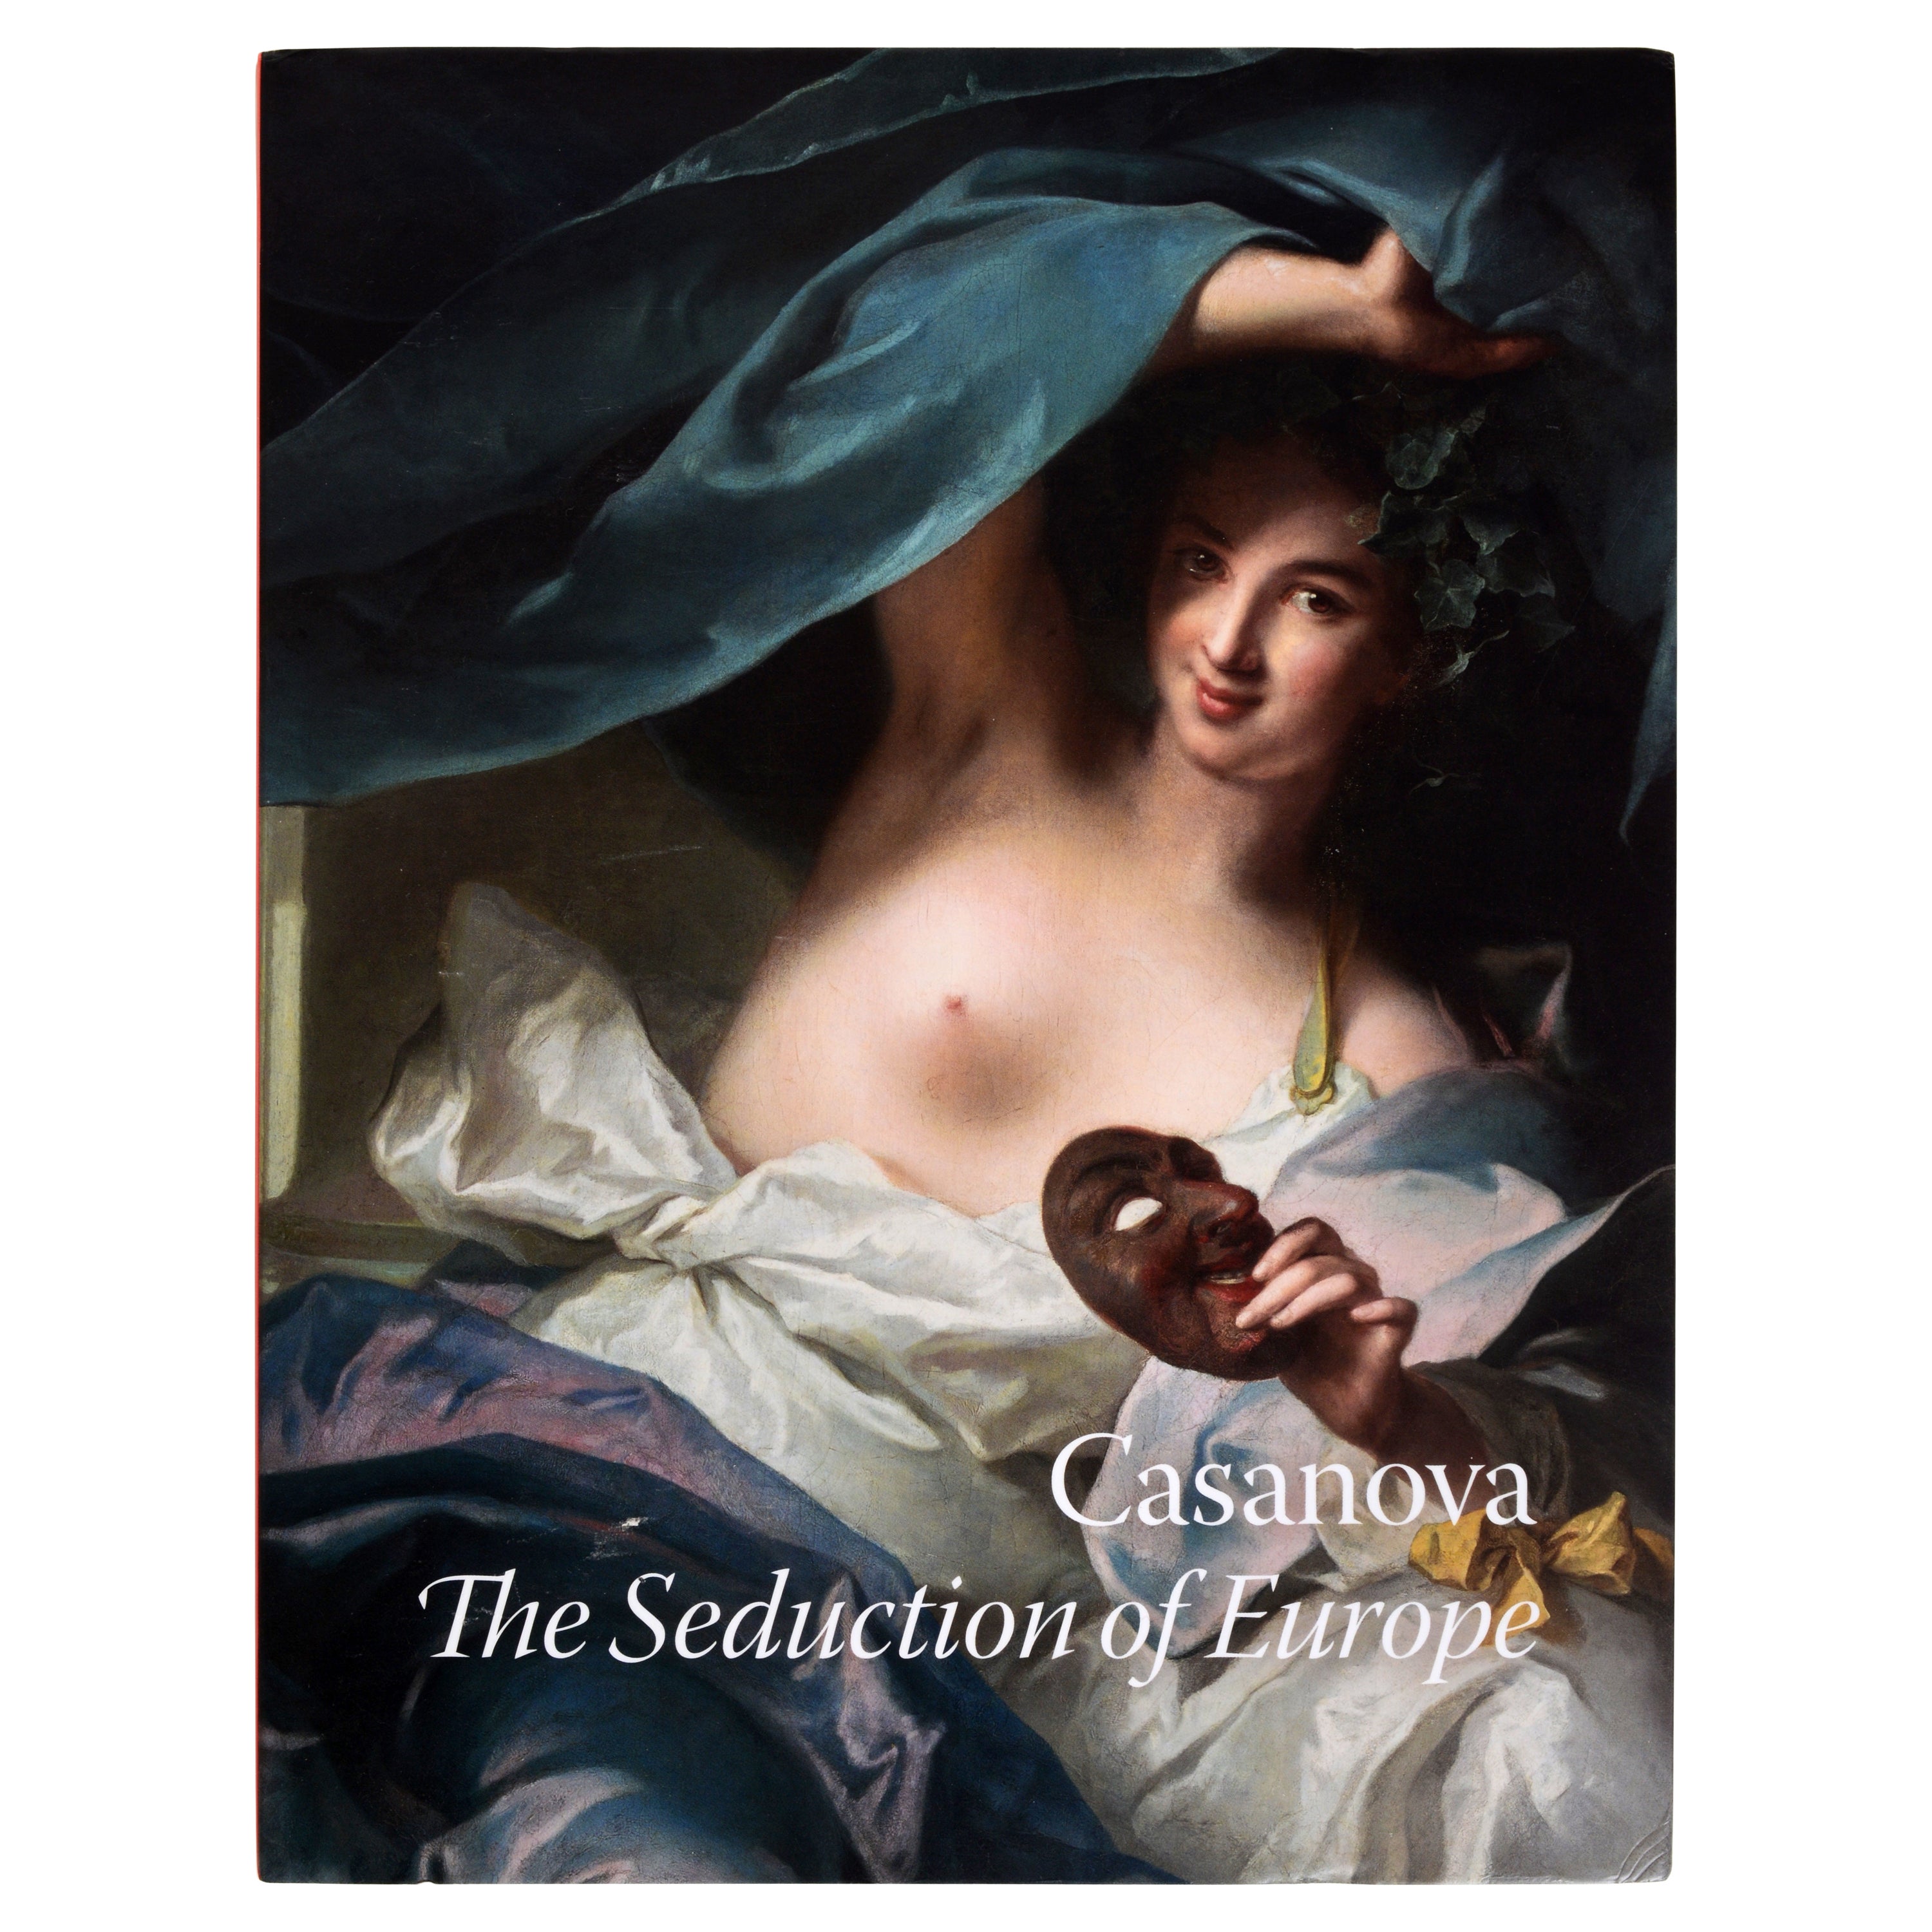 Exhibition, Casanovia; Seduction of Europe, by Frederick Ilchman, Stated 1st Ed  For Sale